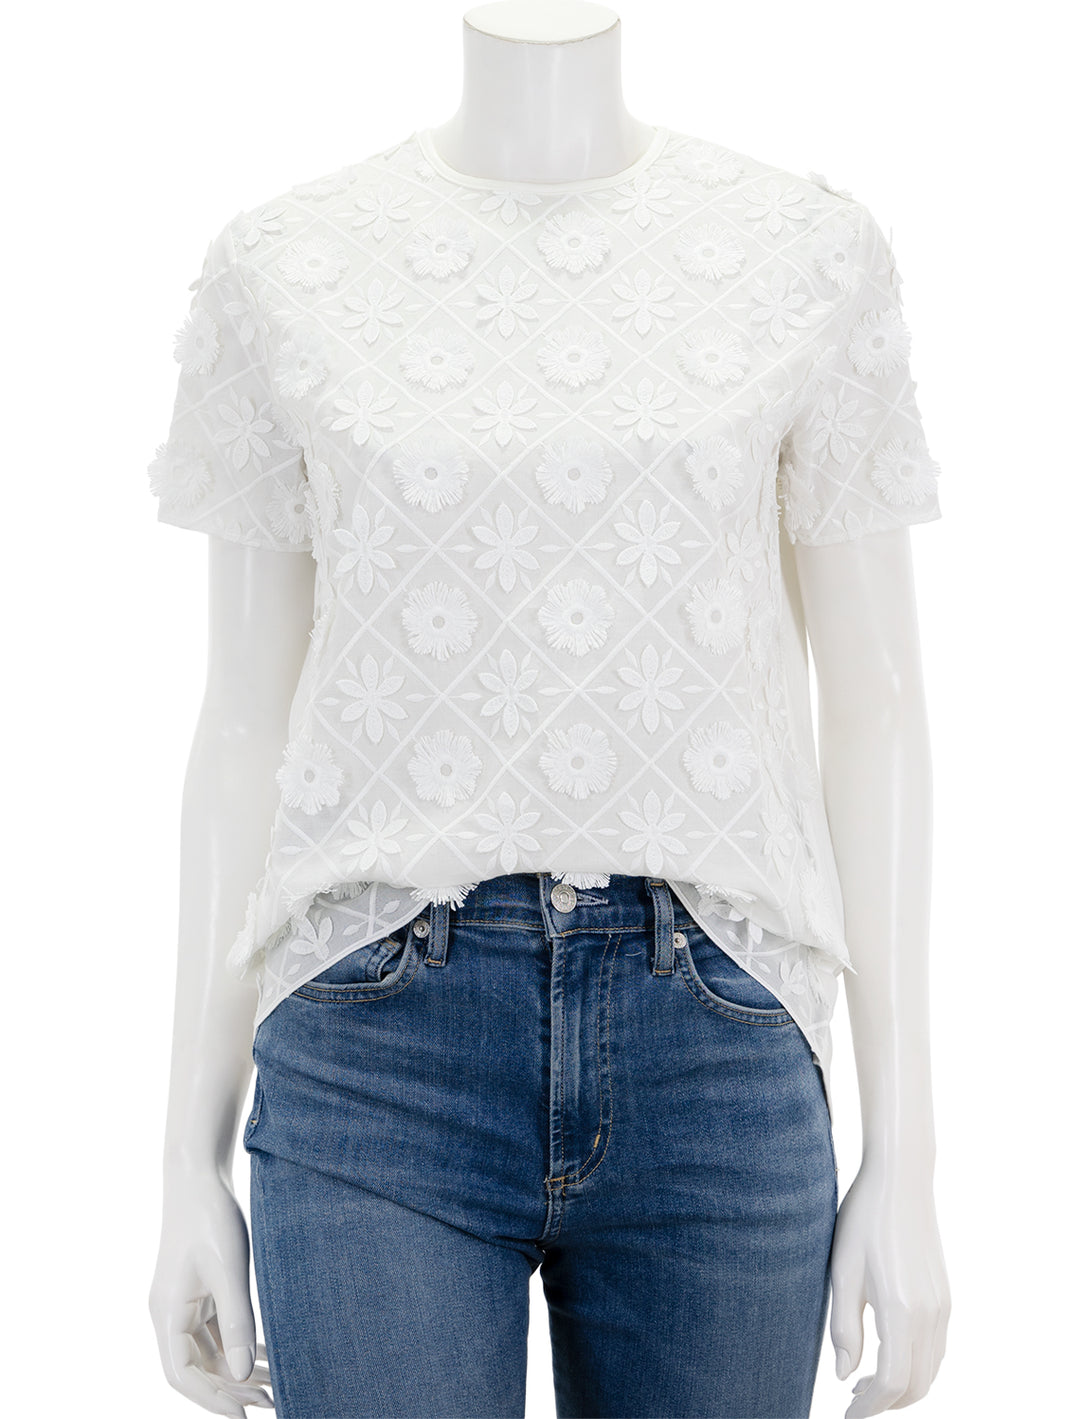 Front view of Vilagallo's darzie top in ivory.